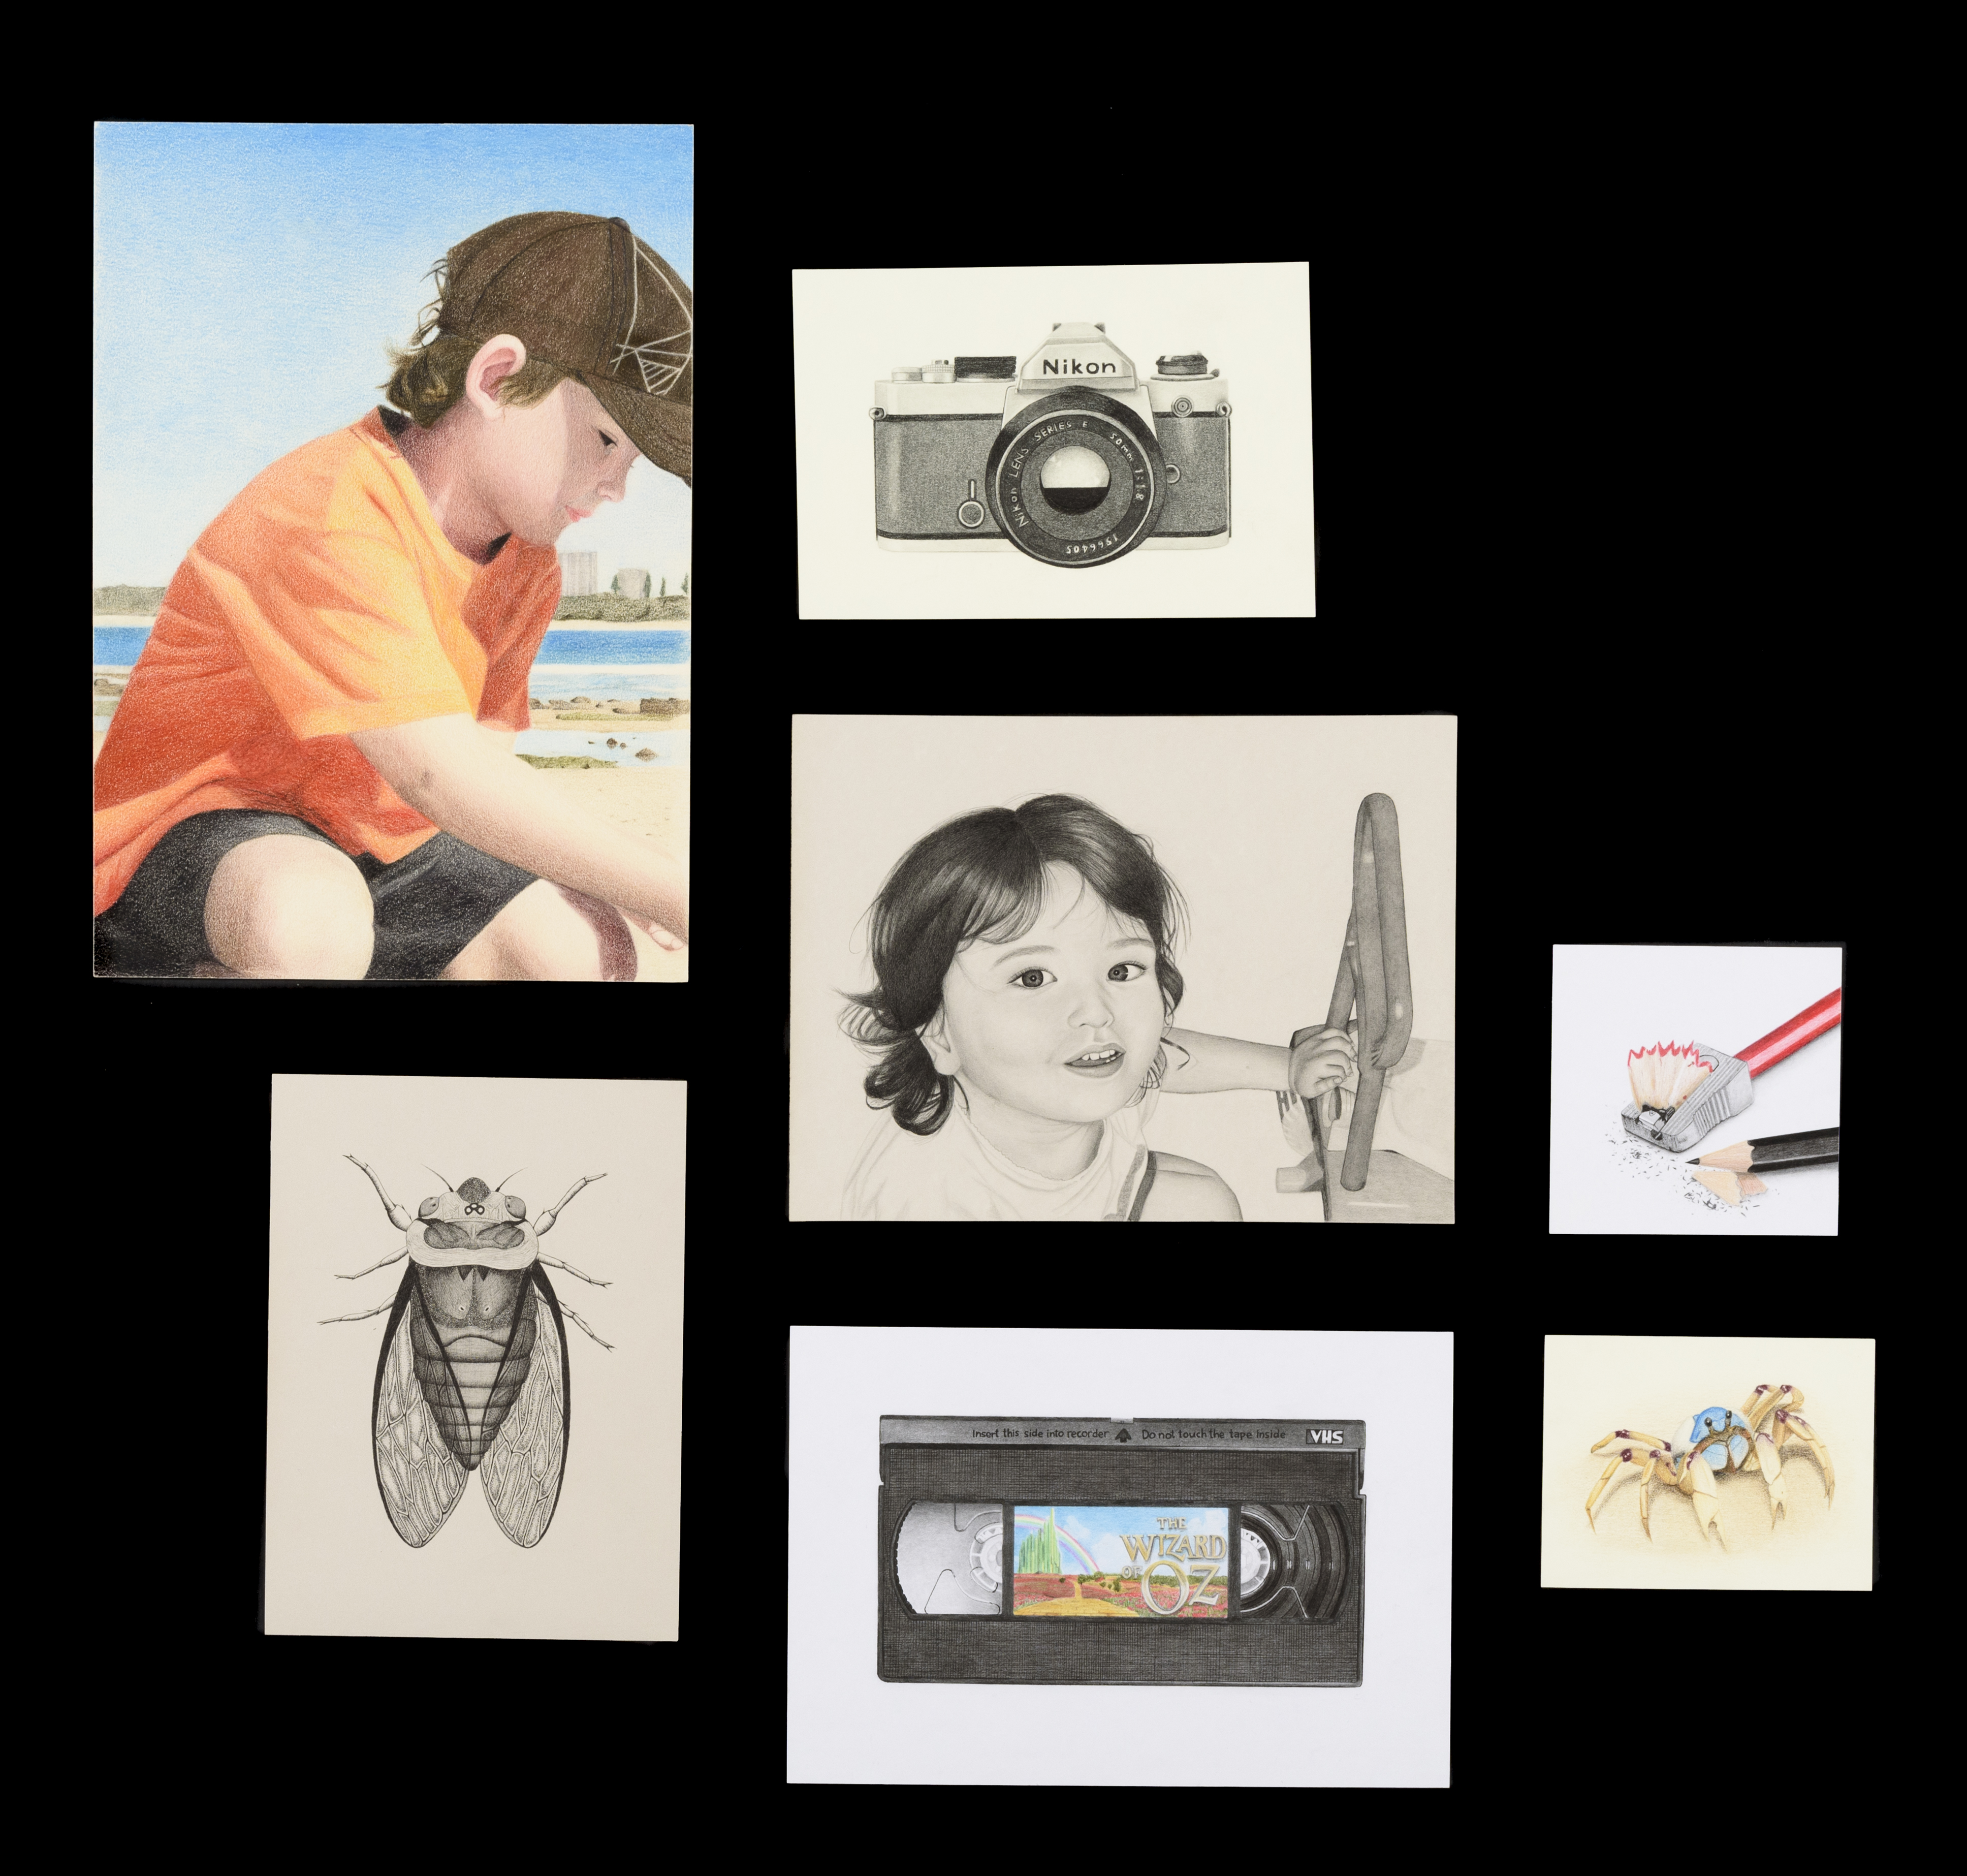 Seven pencil drawings of various sizes of items and memories that evoke nostaligia - a VHS tape, a vintage camera, a child at the beach.